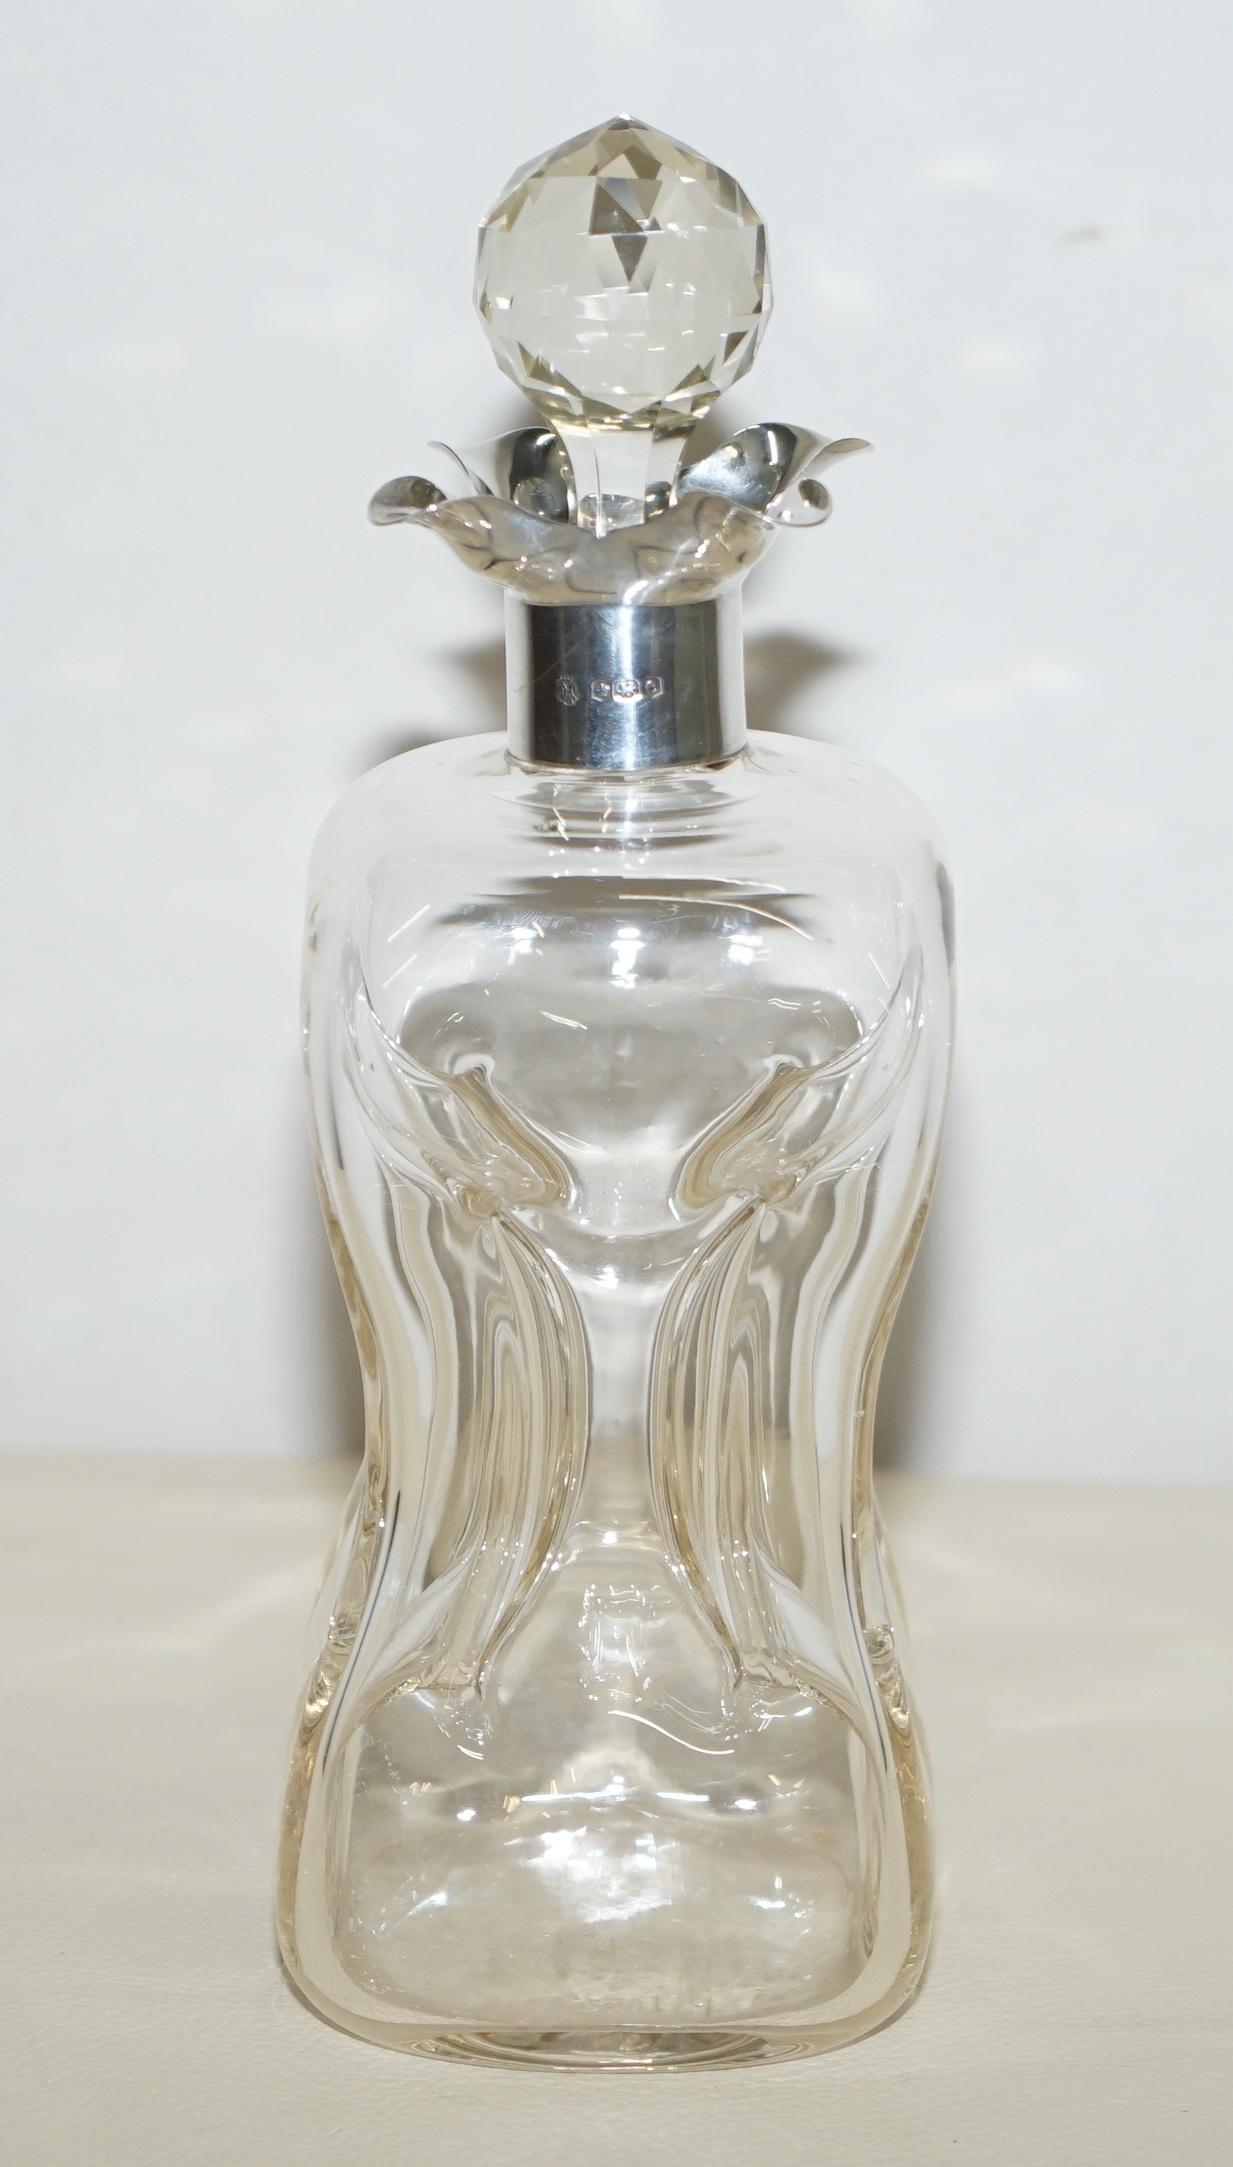 We are delighted to offer for sale this sublime 1922 cut glass crystal Pinch decanter with sterling silver collar

A good looking and decorative piece, the collar is fully hallmarked with the sideways facing Lion for 925 Sterling silver, the date